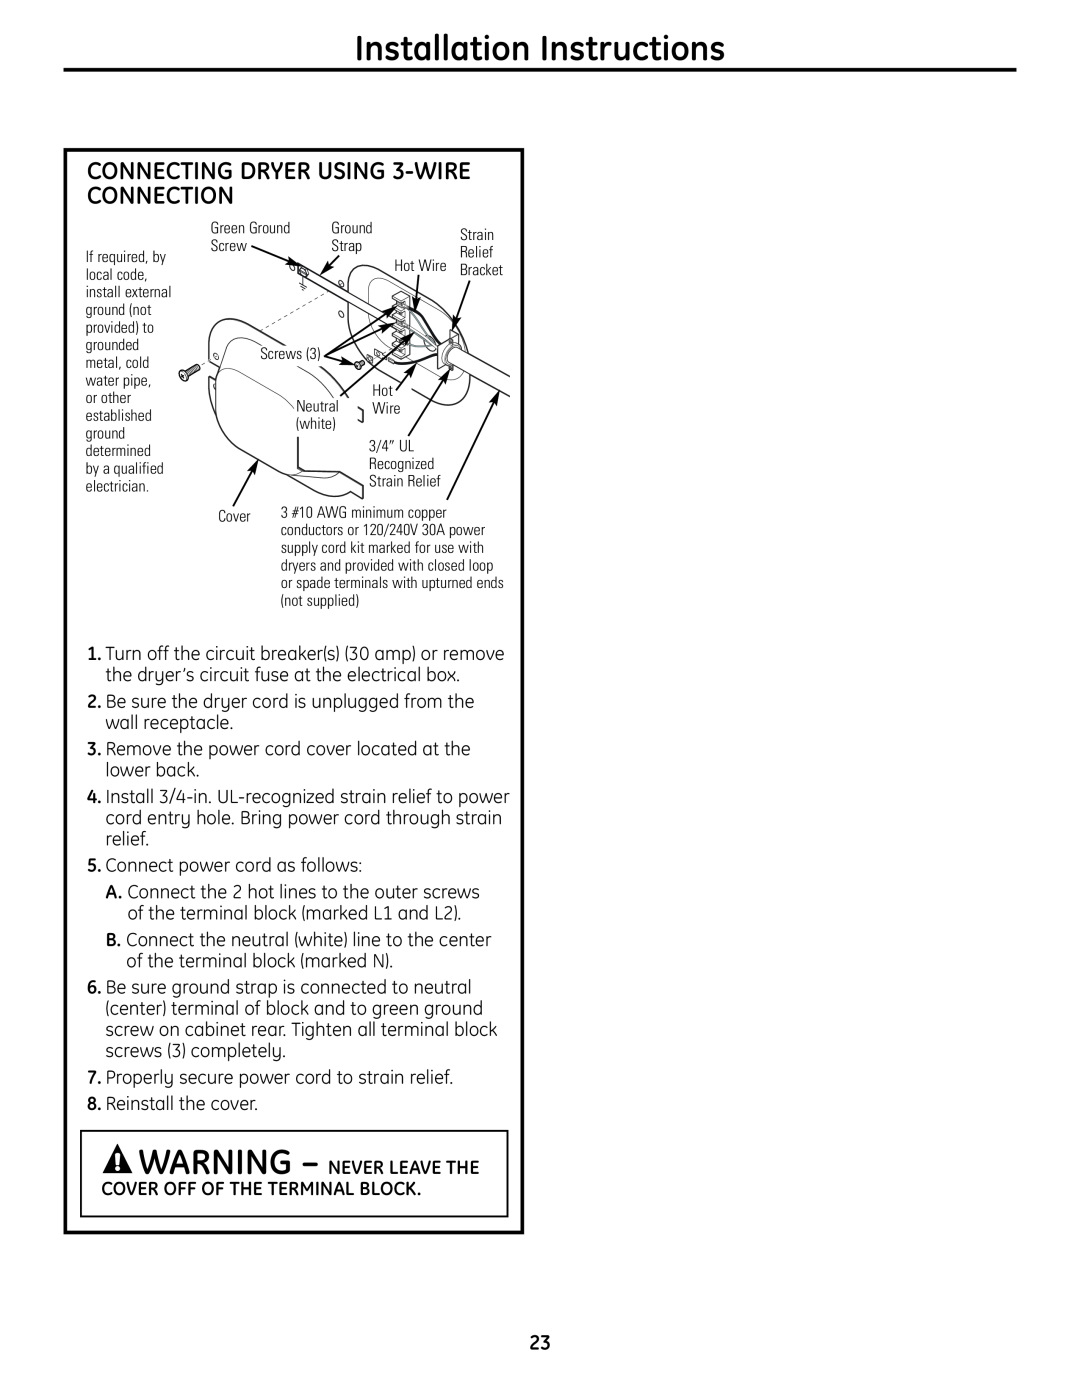 GE UPVH890 installation instructions CONNECTING DRYER USING 3-WIRE CONNECTION, Installation Instructions, Hot Wire Bracket 